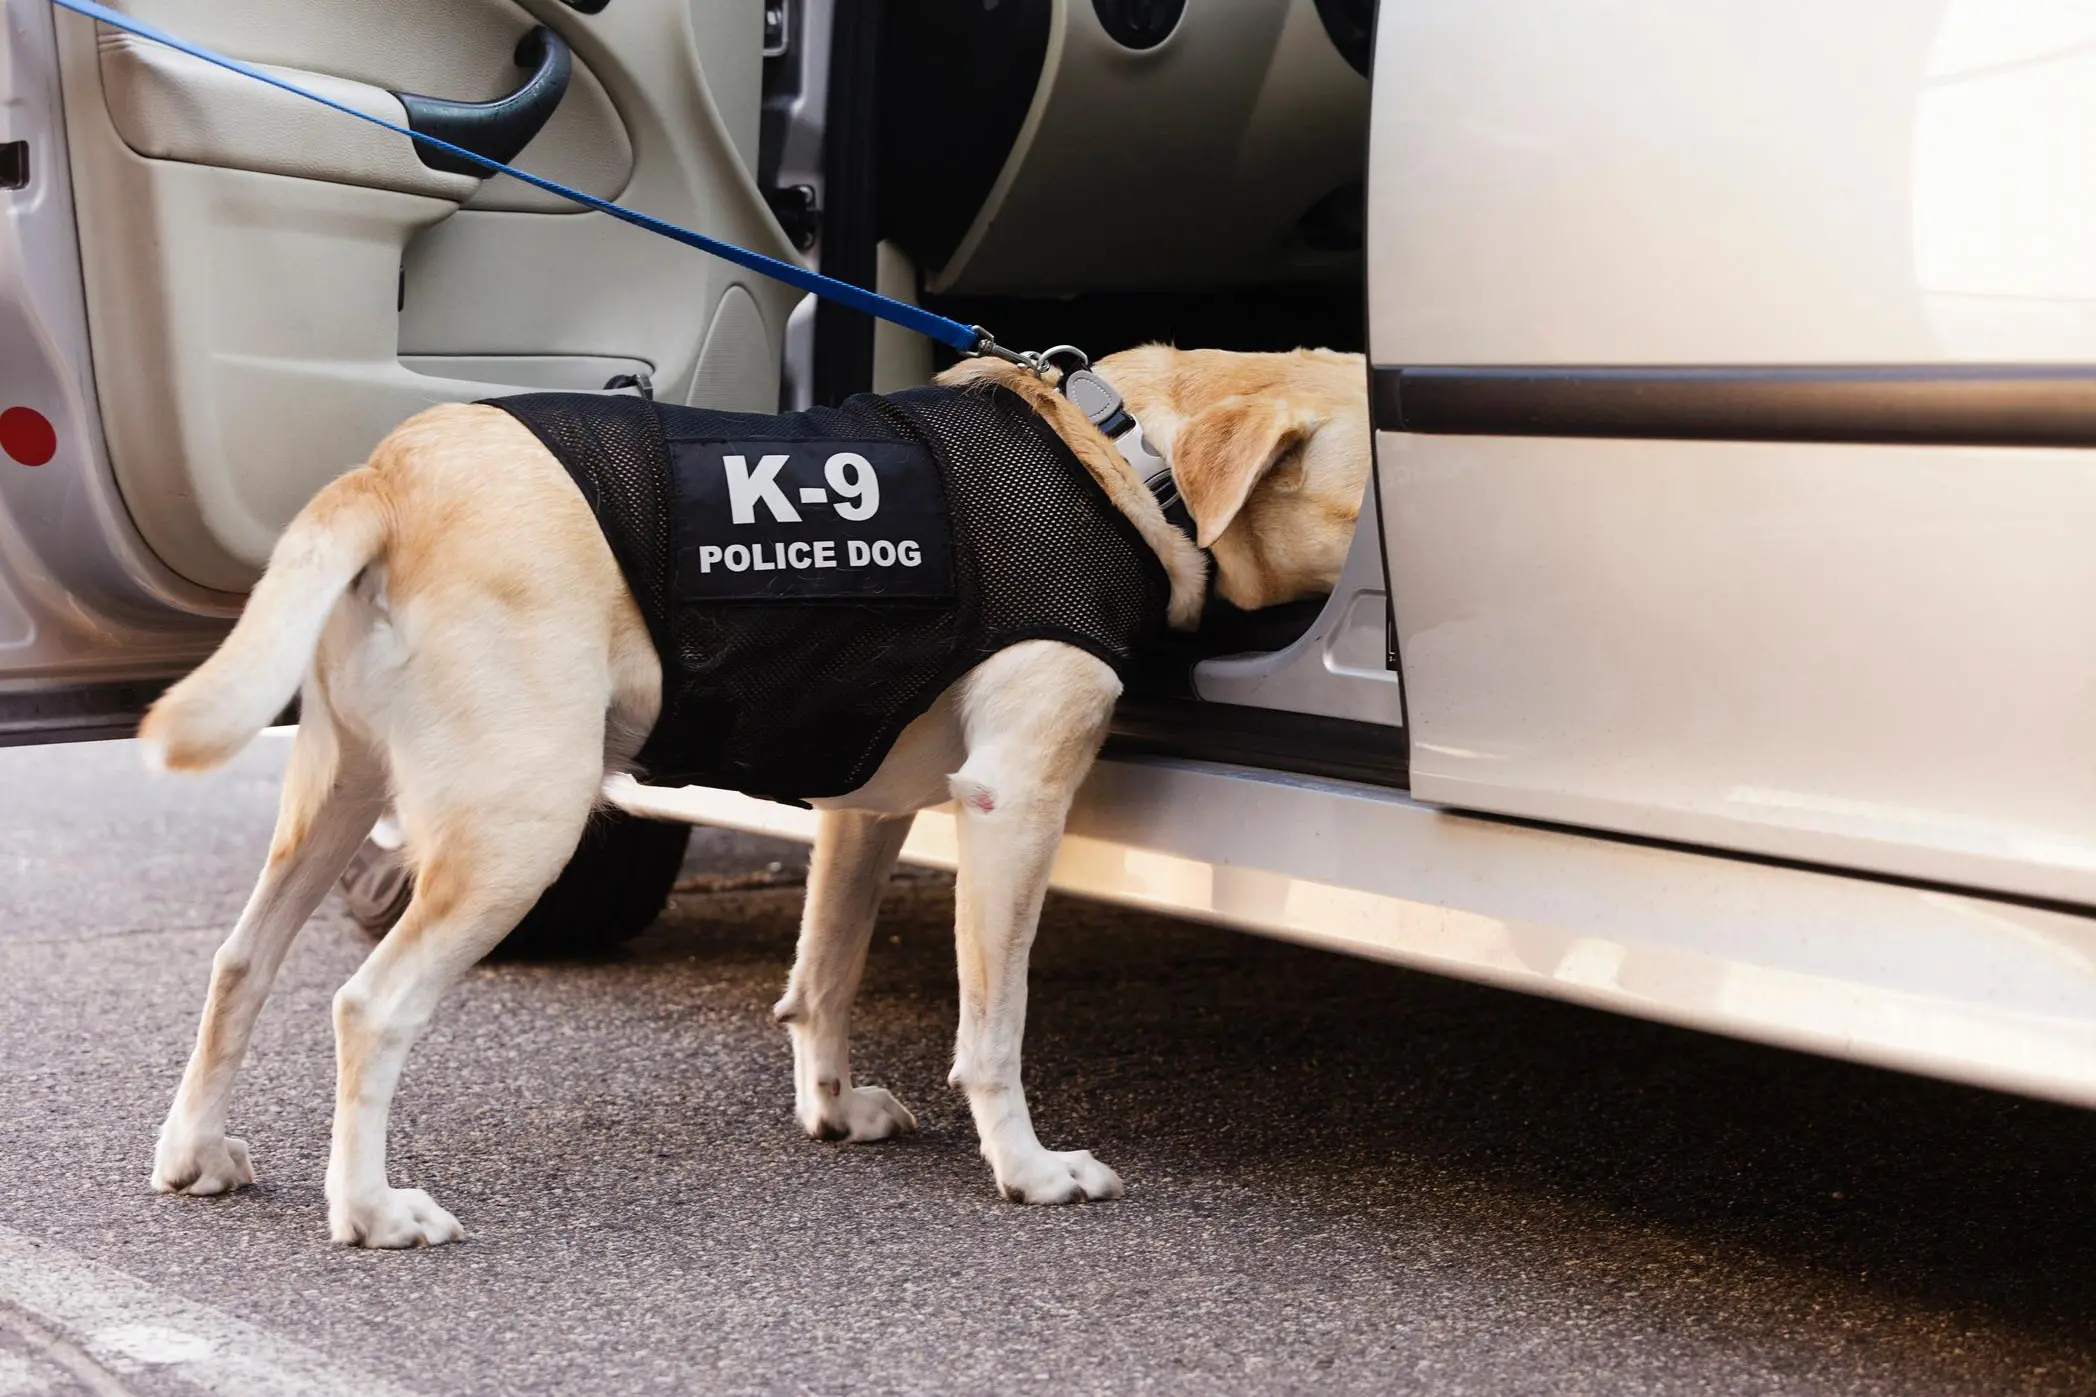 Led by the nose: Meet the UAE's COVID-19 sniffer dogs